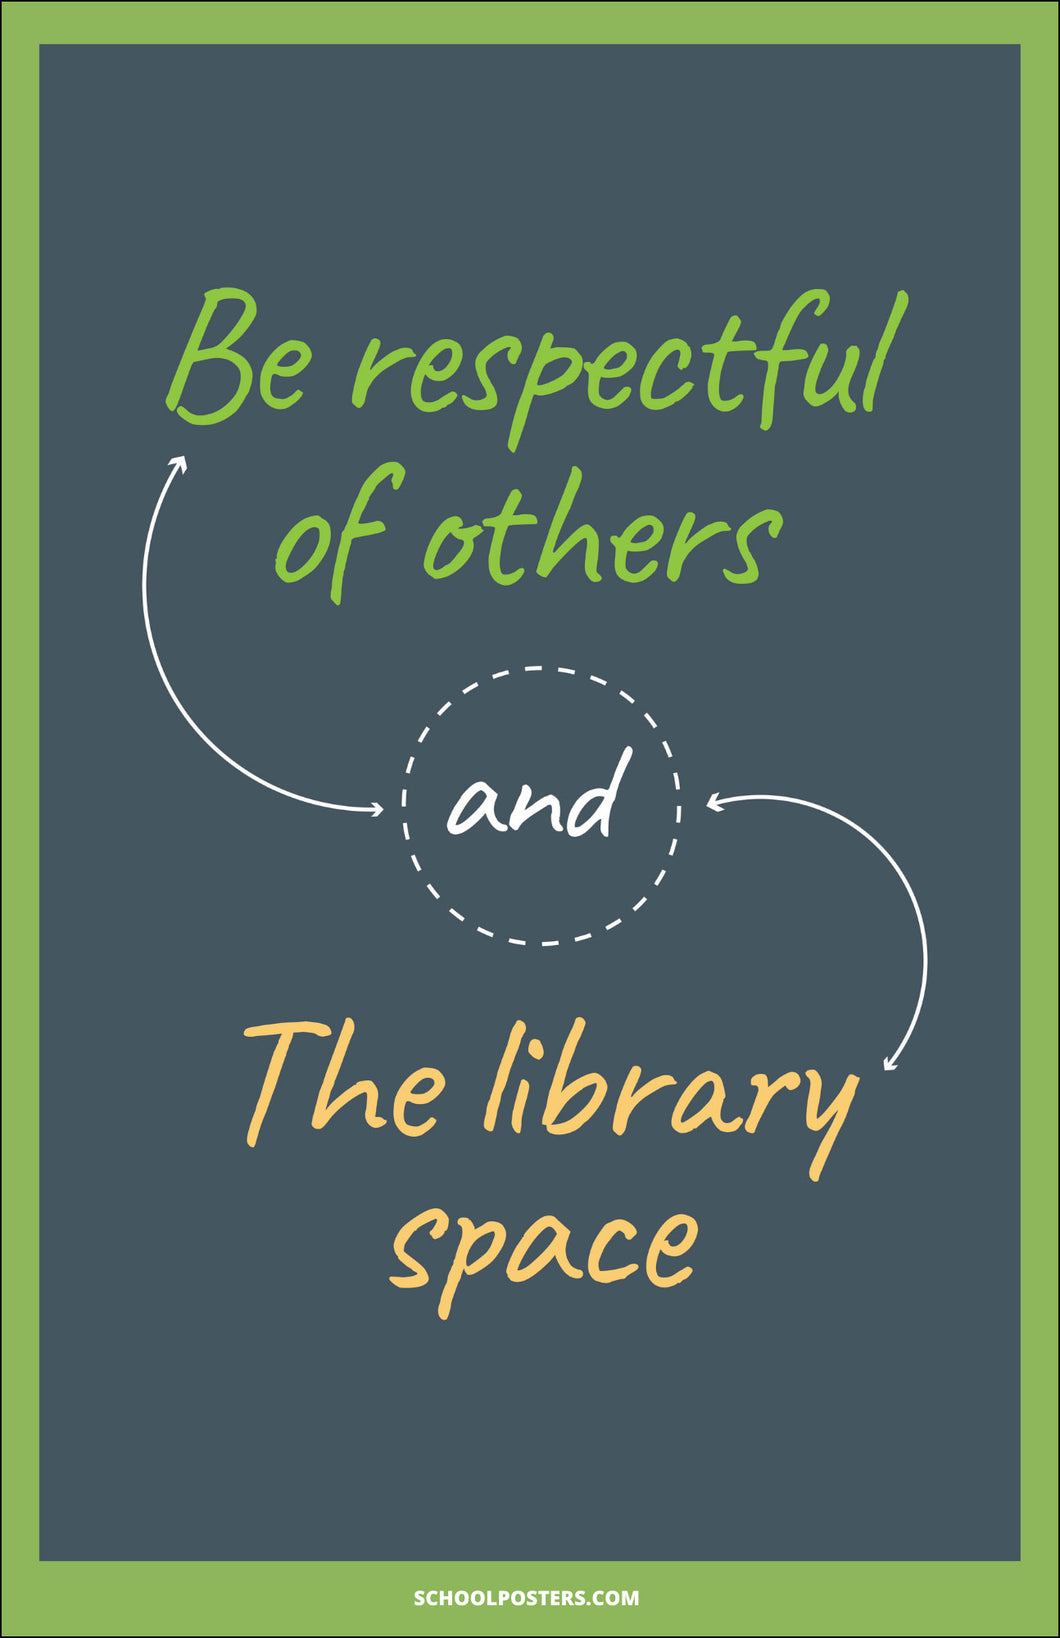 Be Respectful of Others Poster